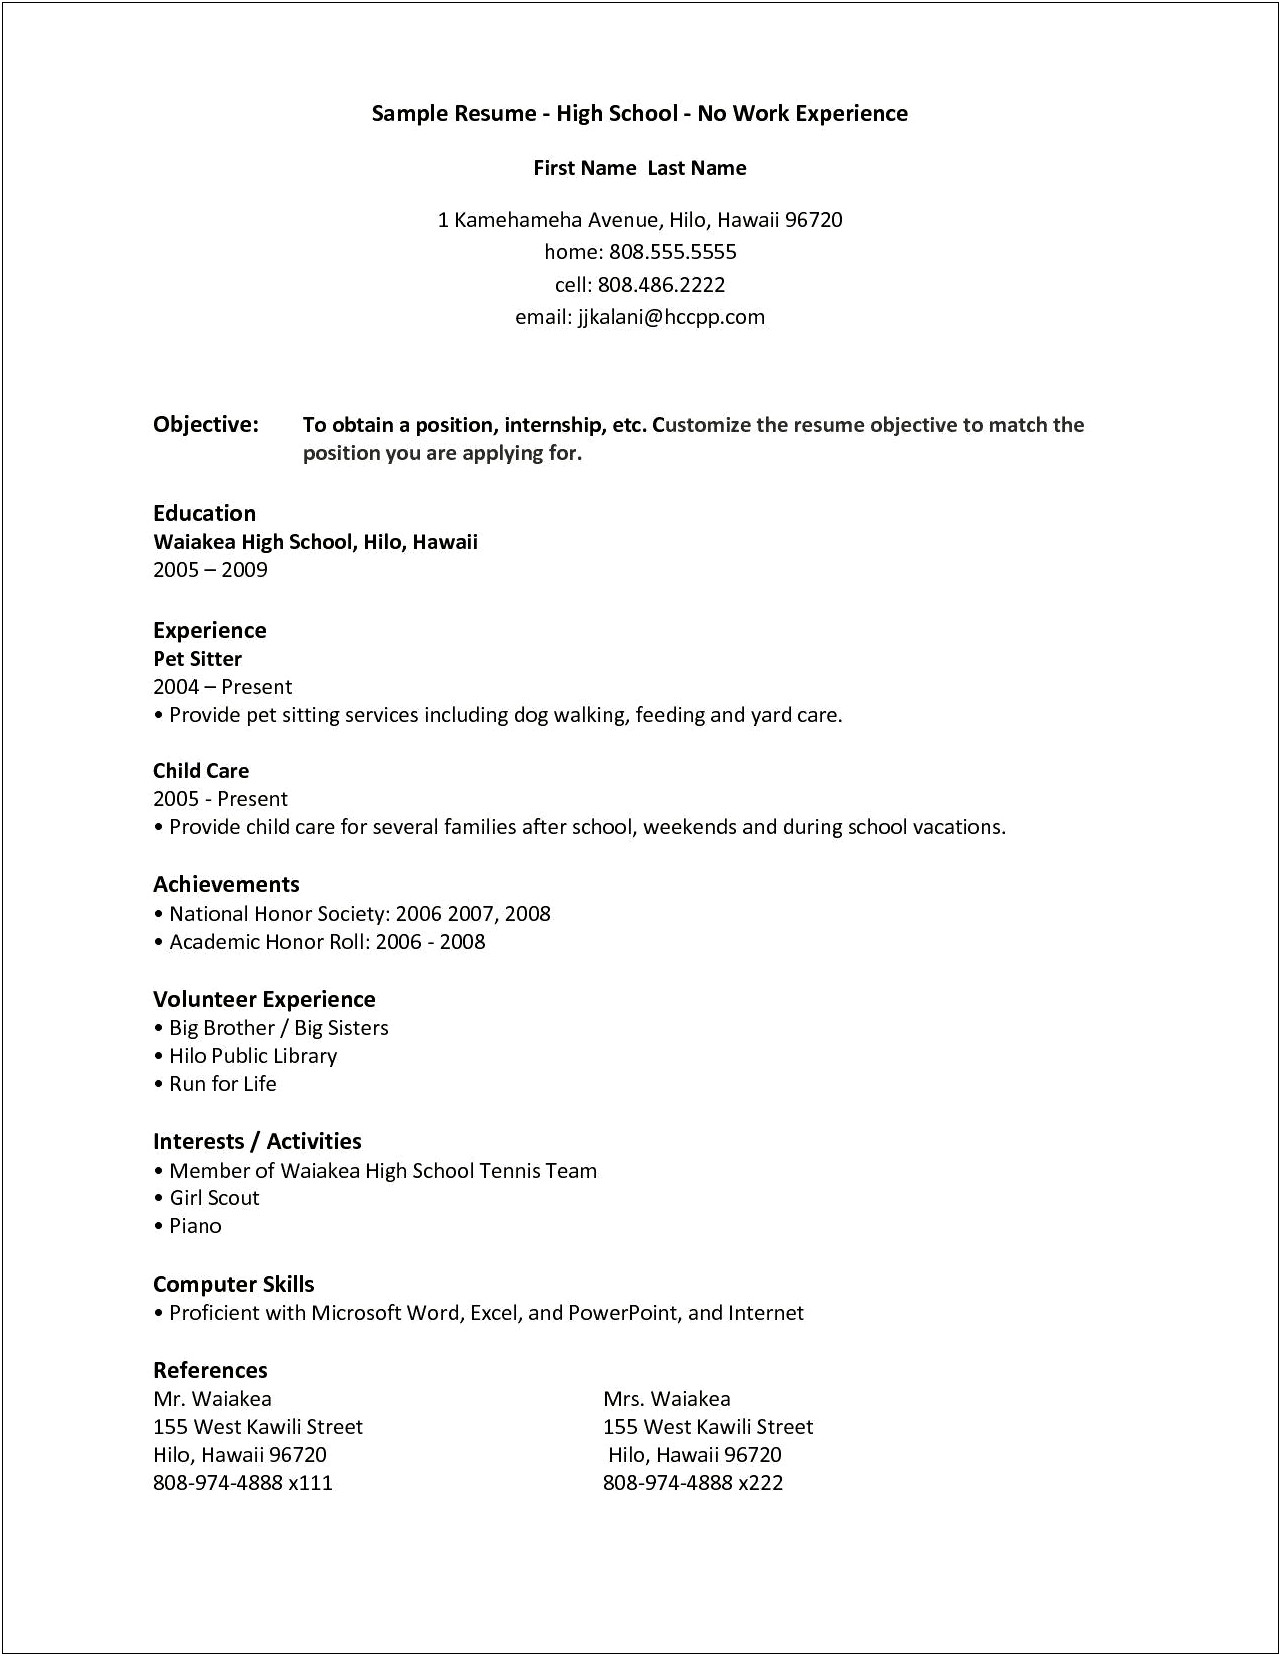 Resume Template For First Job No Work Experience